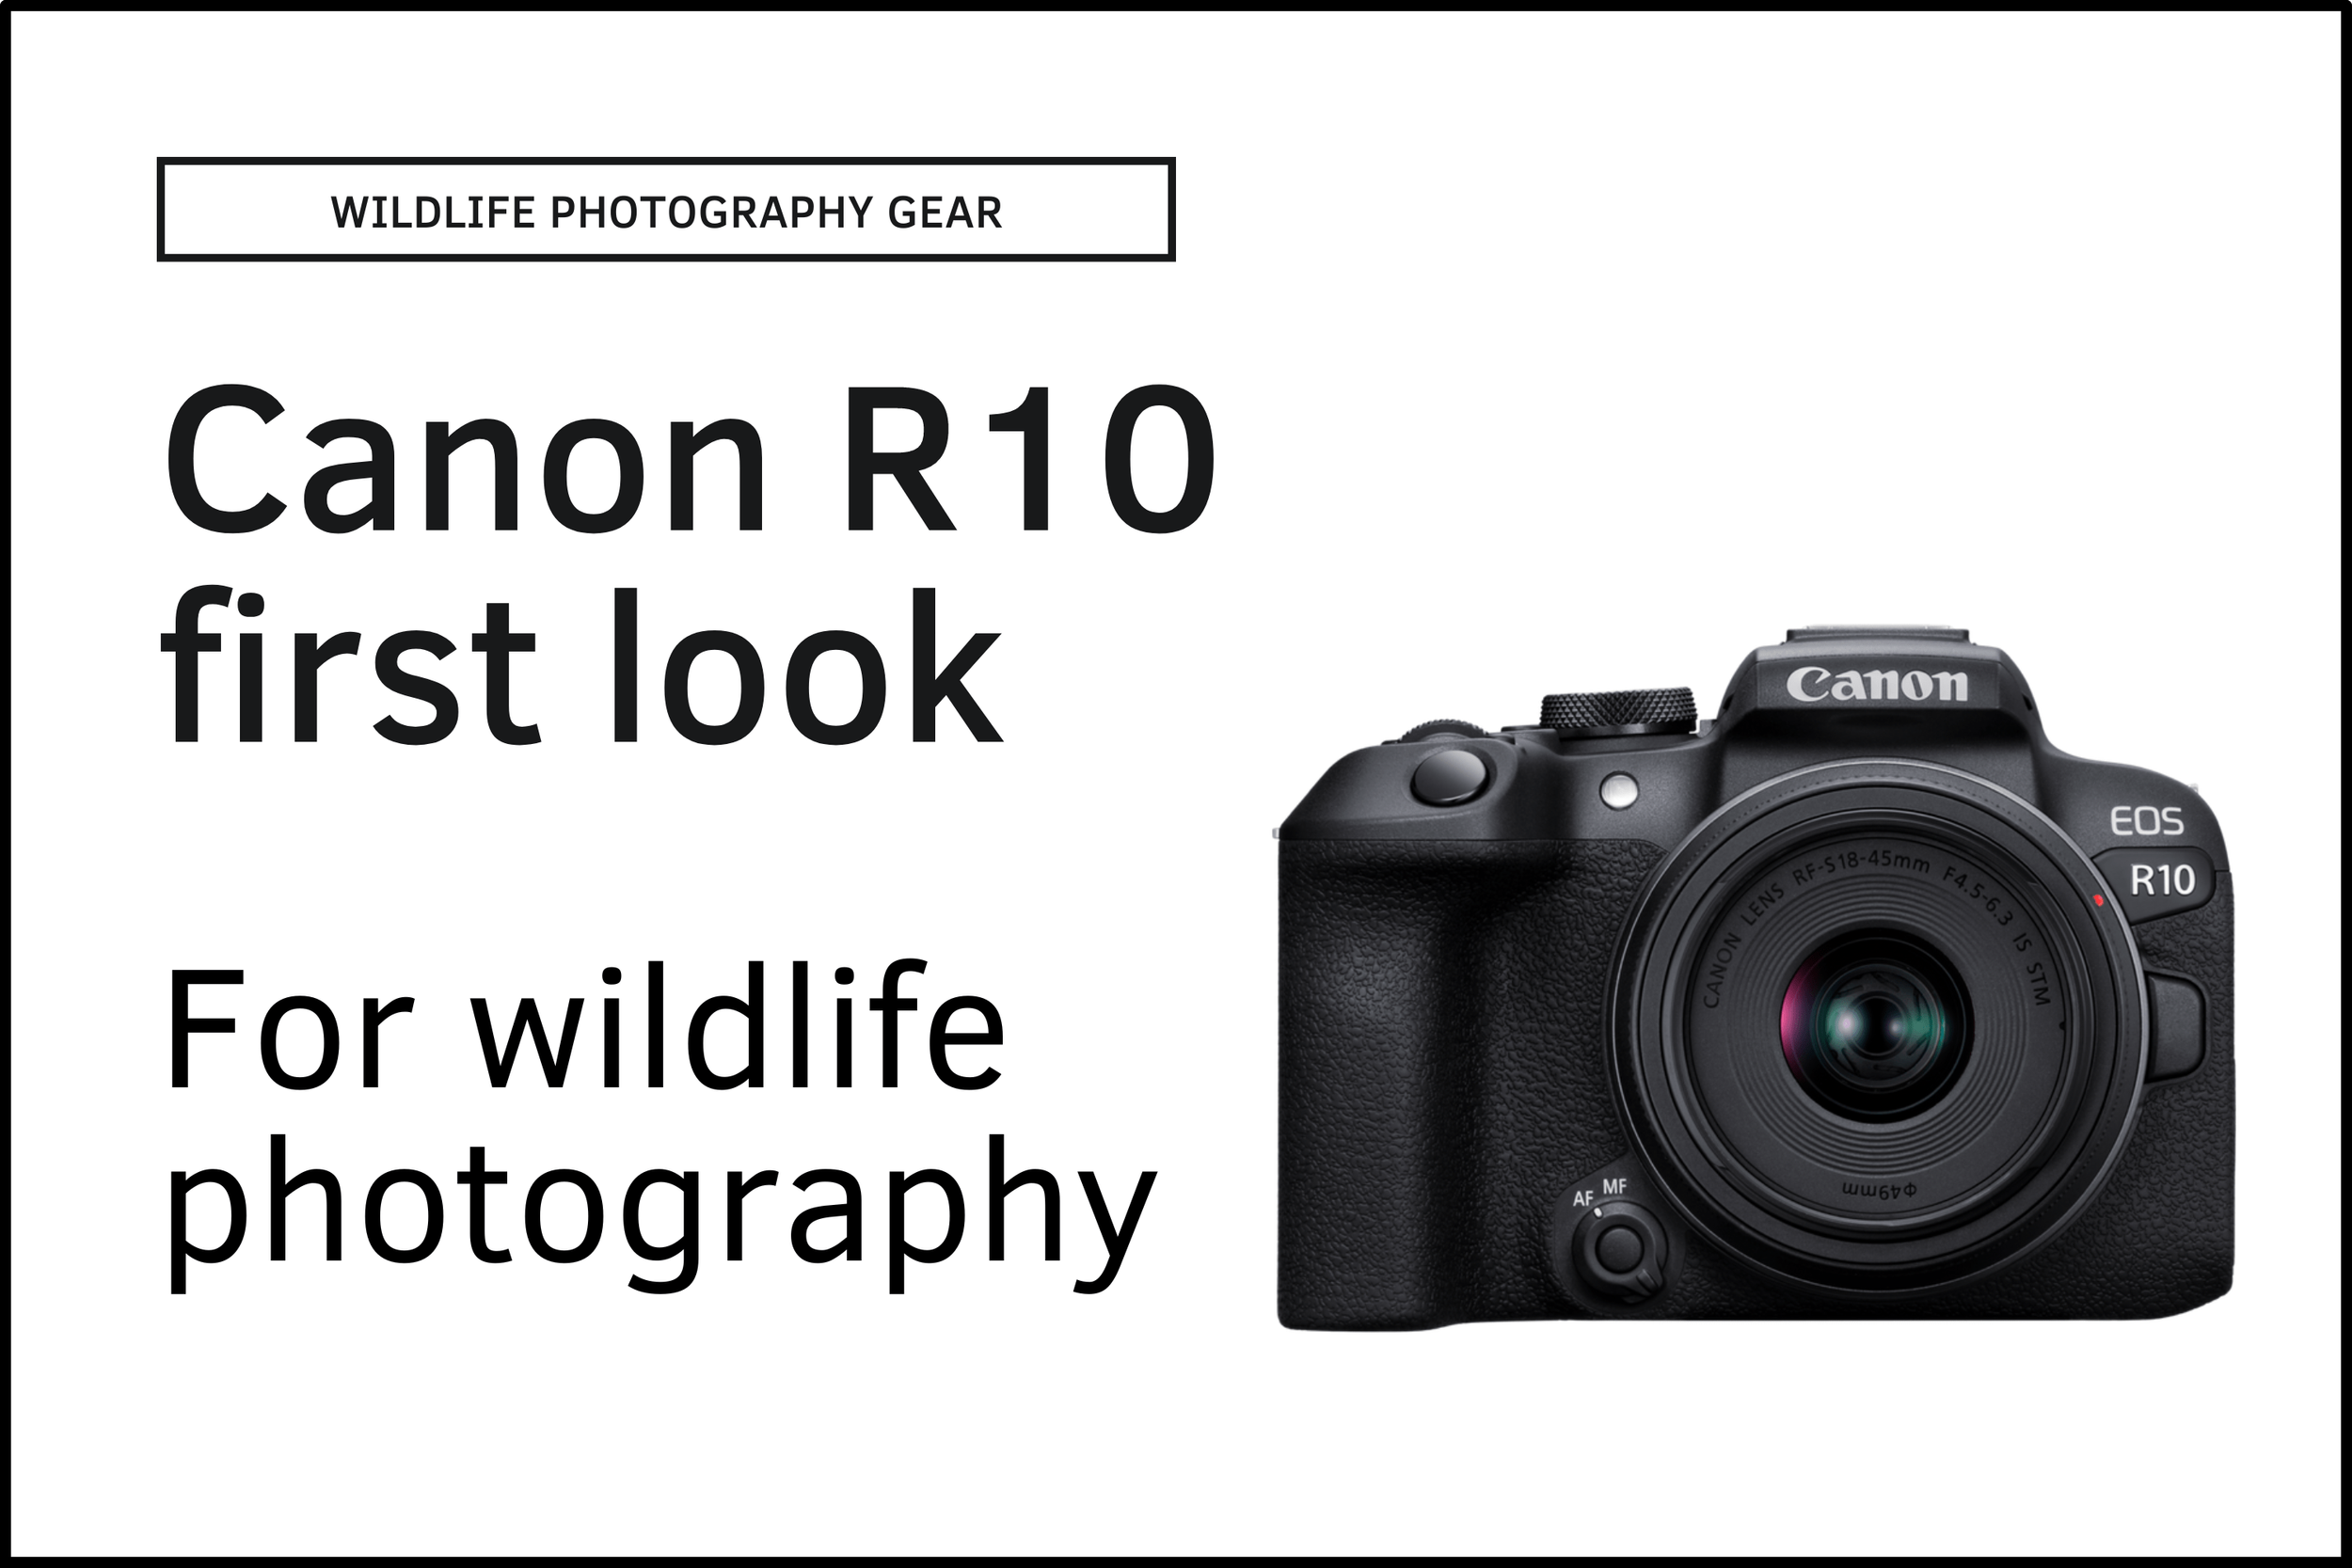 5 reasons why I bought the Canon R10 for wildlife photography